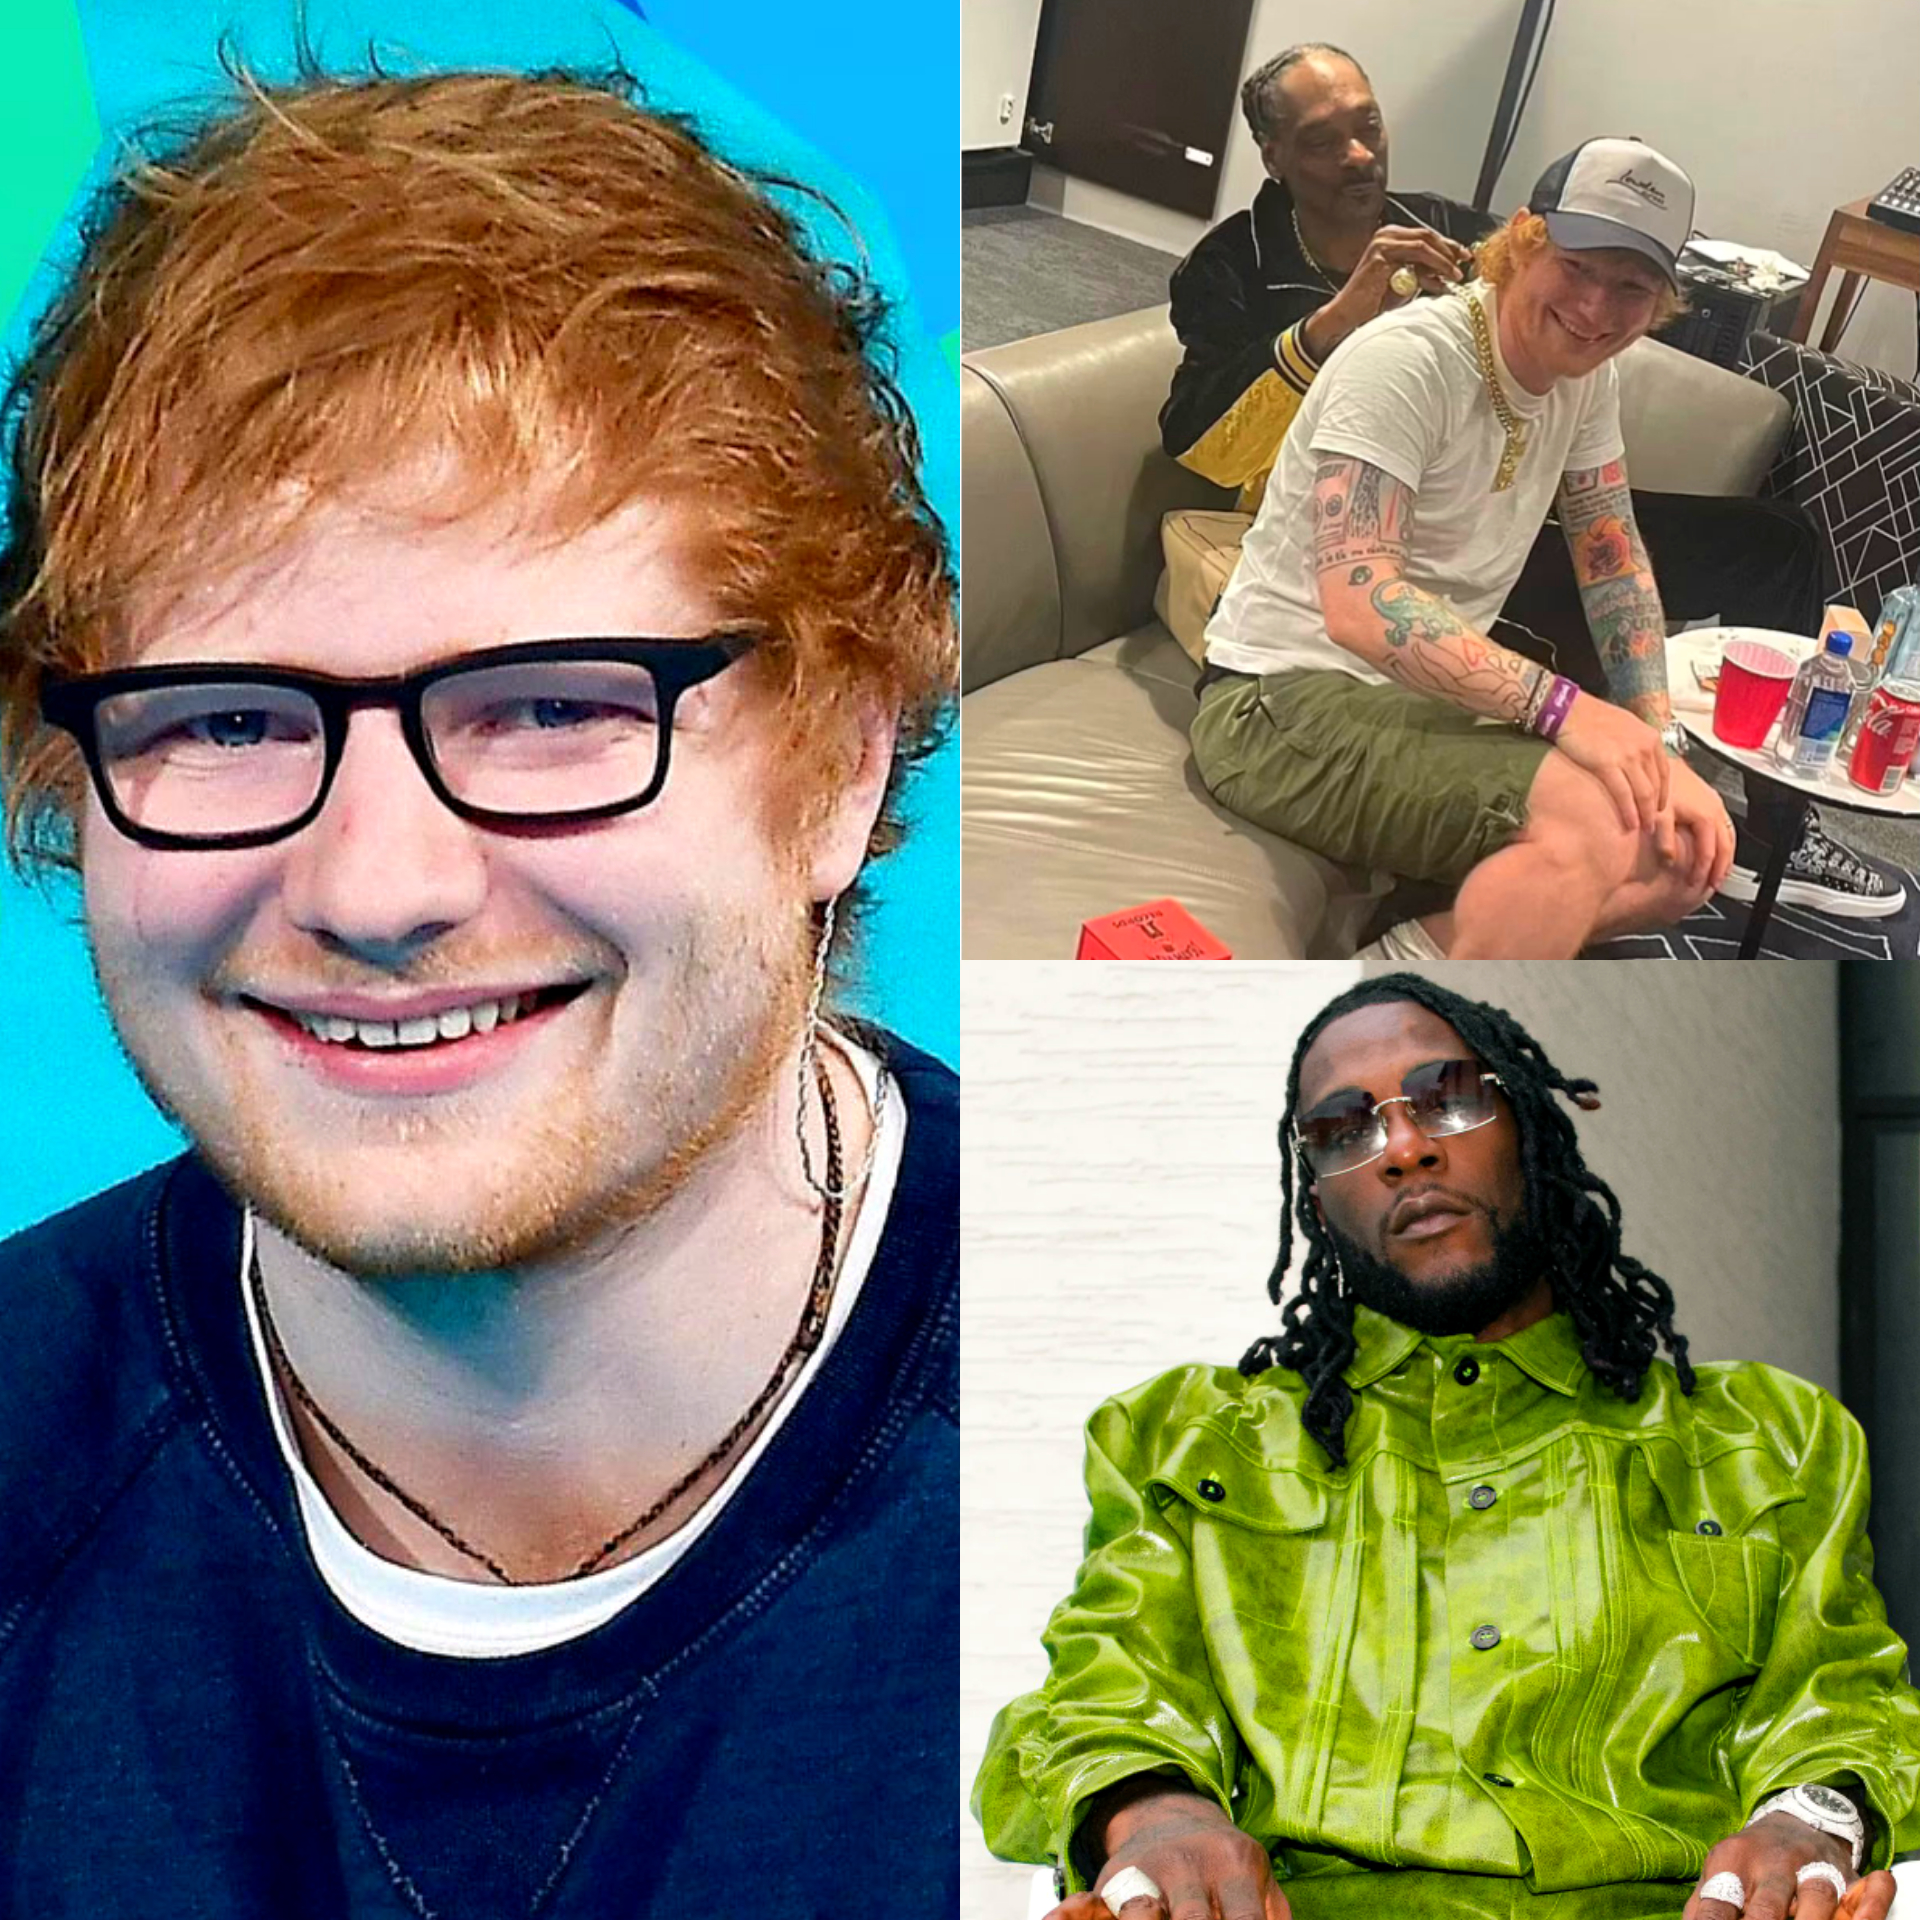 Ed Sheeran Collects Gold Chains Which Raises Concern